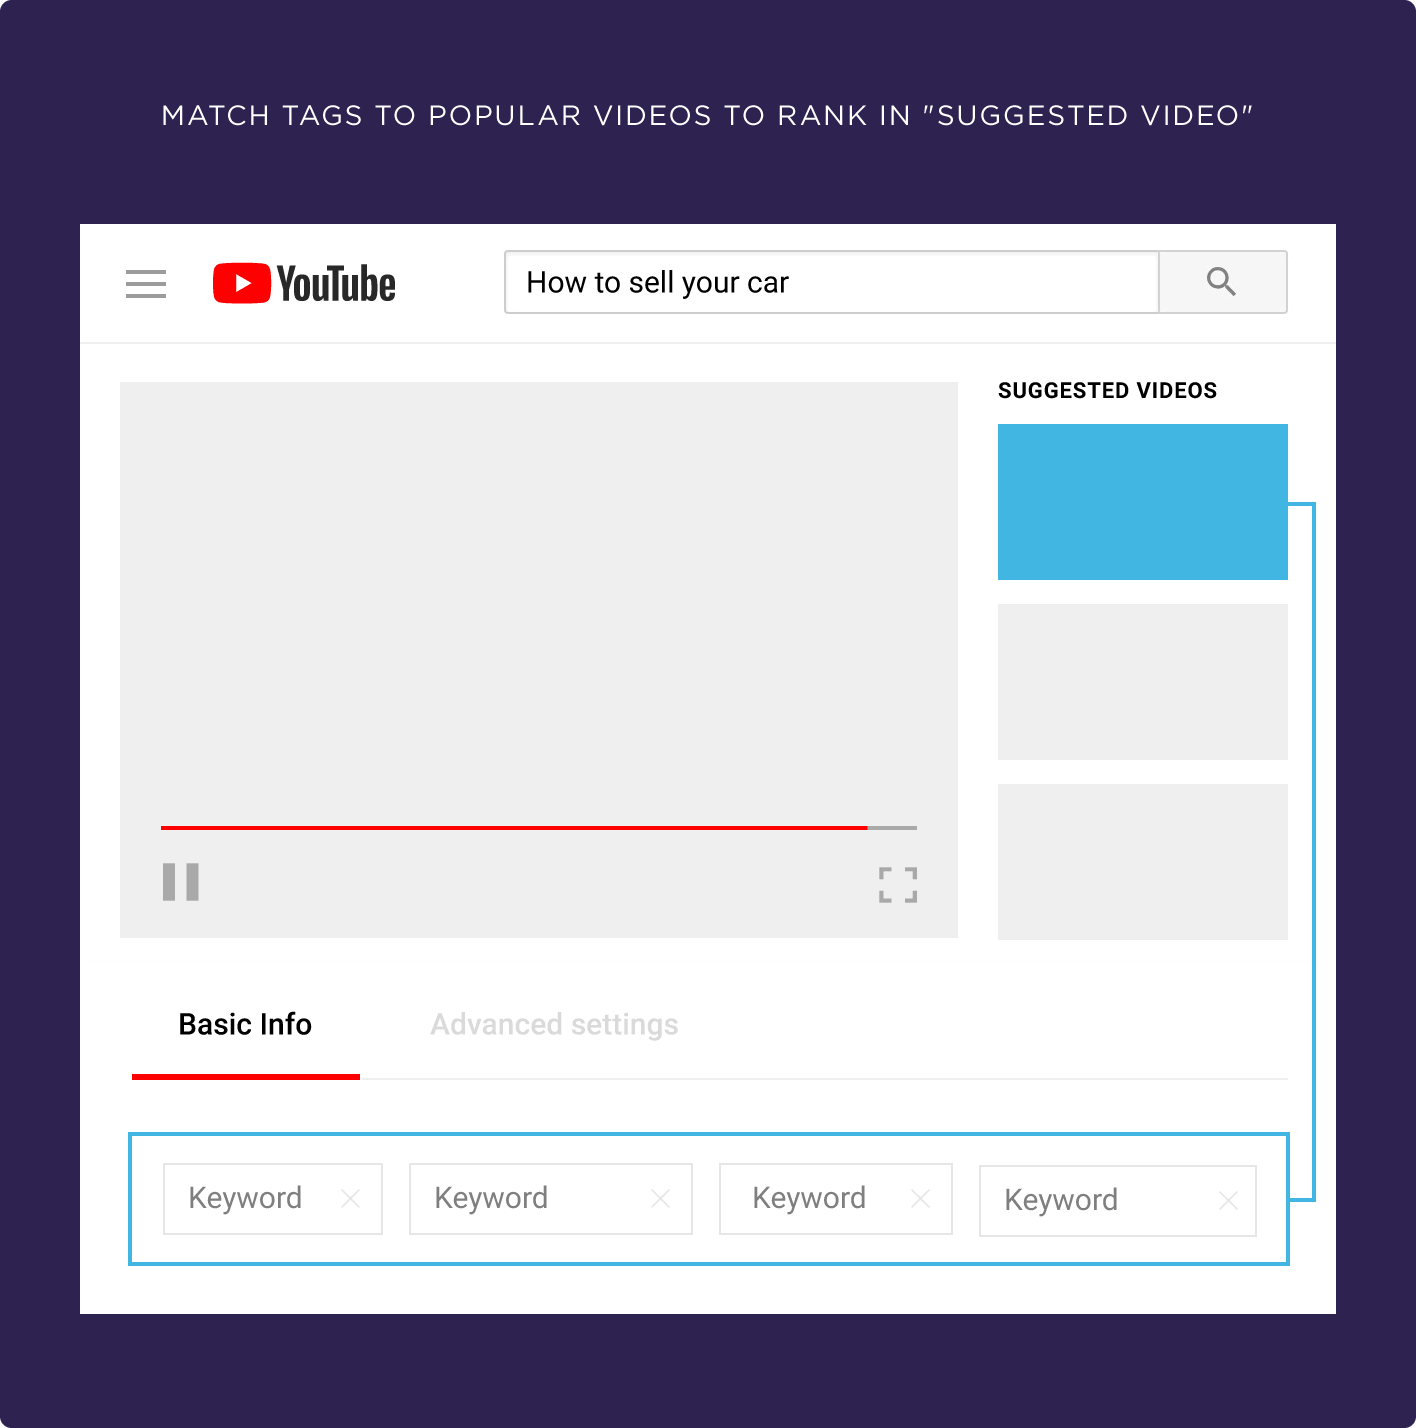 Match tags to popular videos to rank in "Suggested Video"